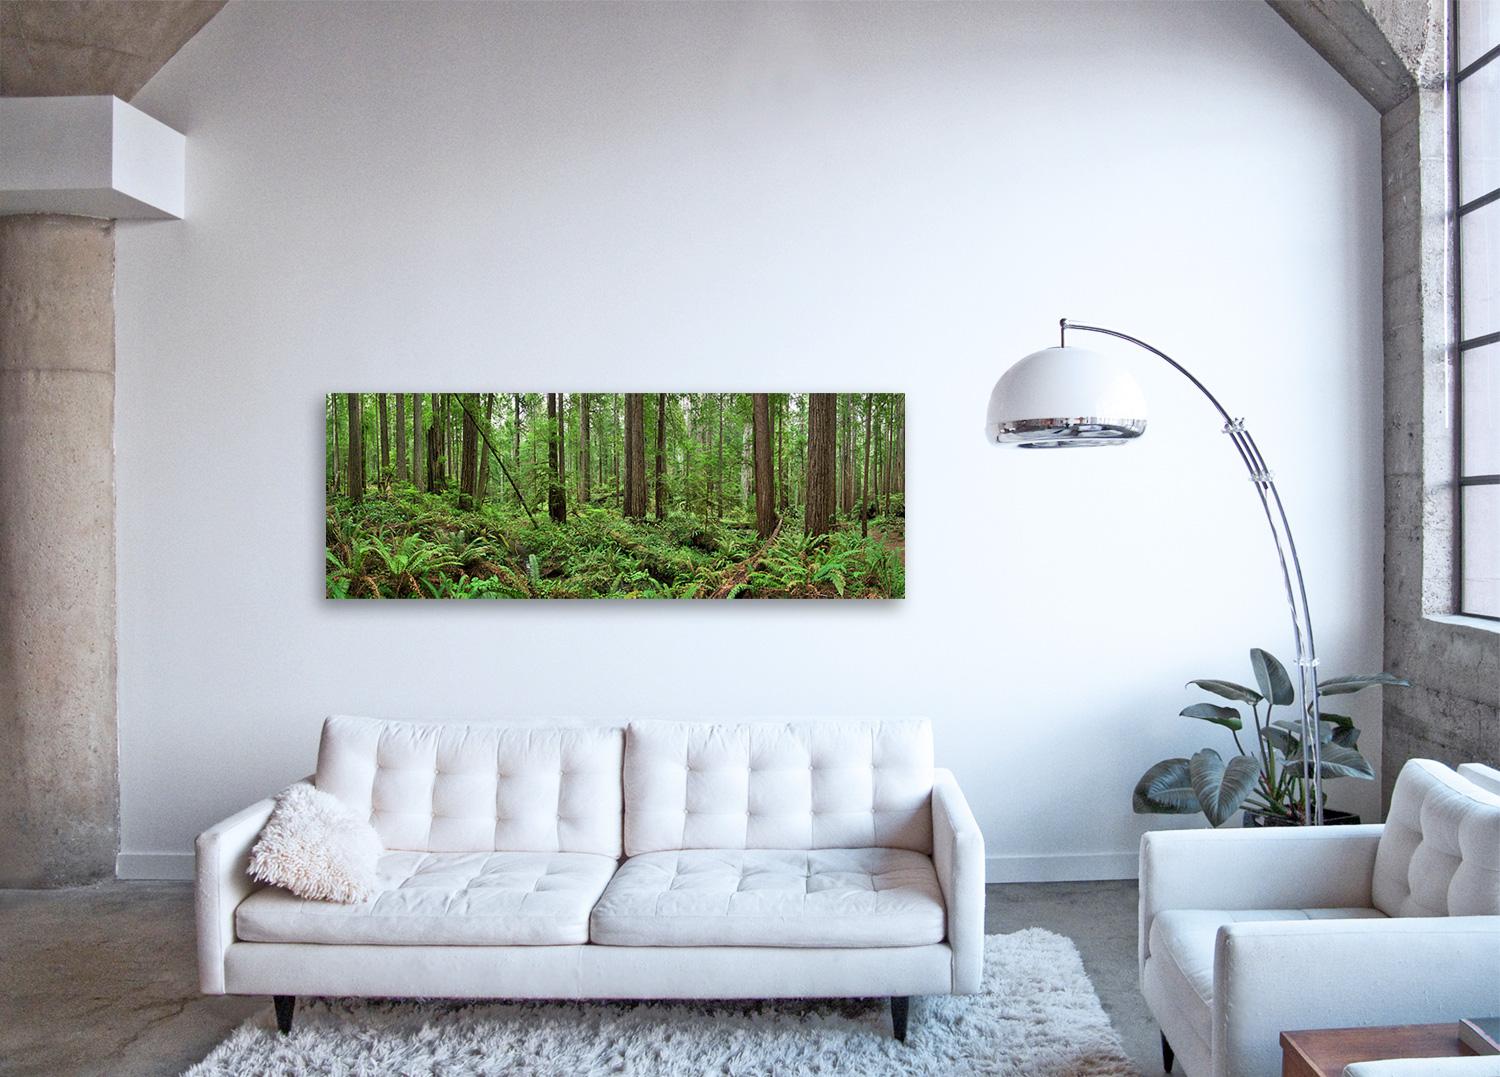 Redwoods - large format nature observation panorama of green redwoods forest - Print by Erik Pawassar